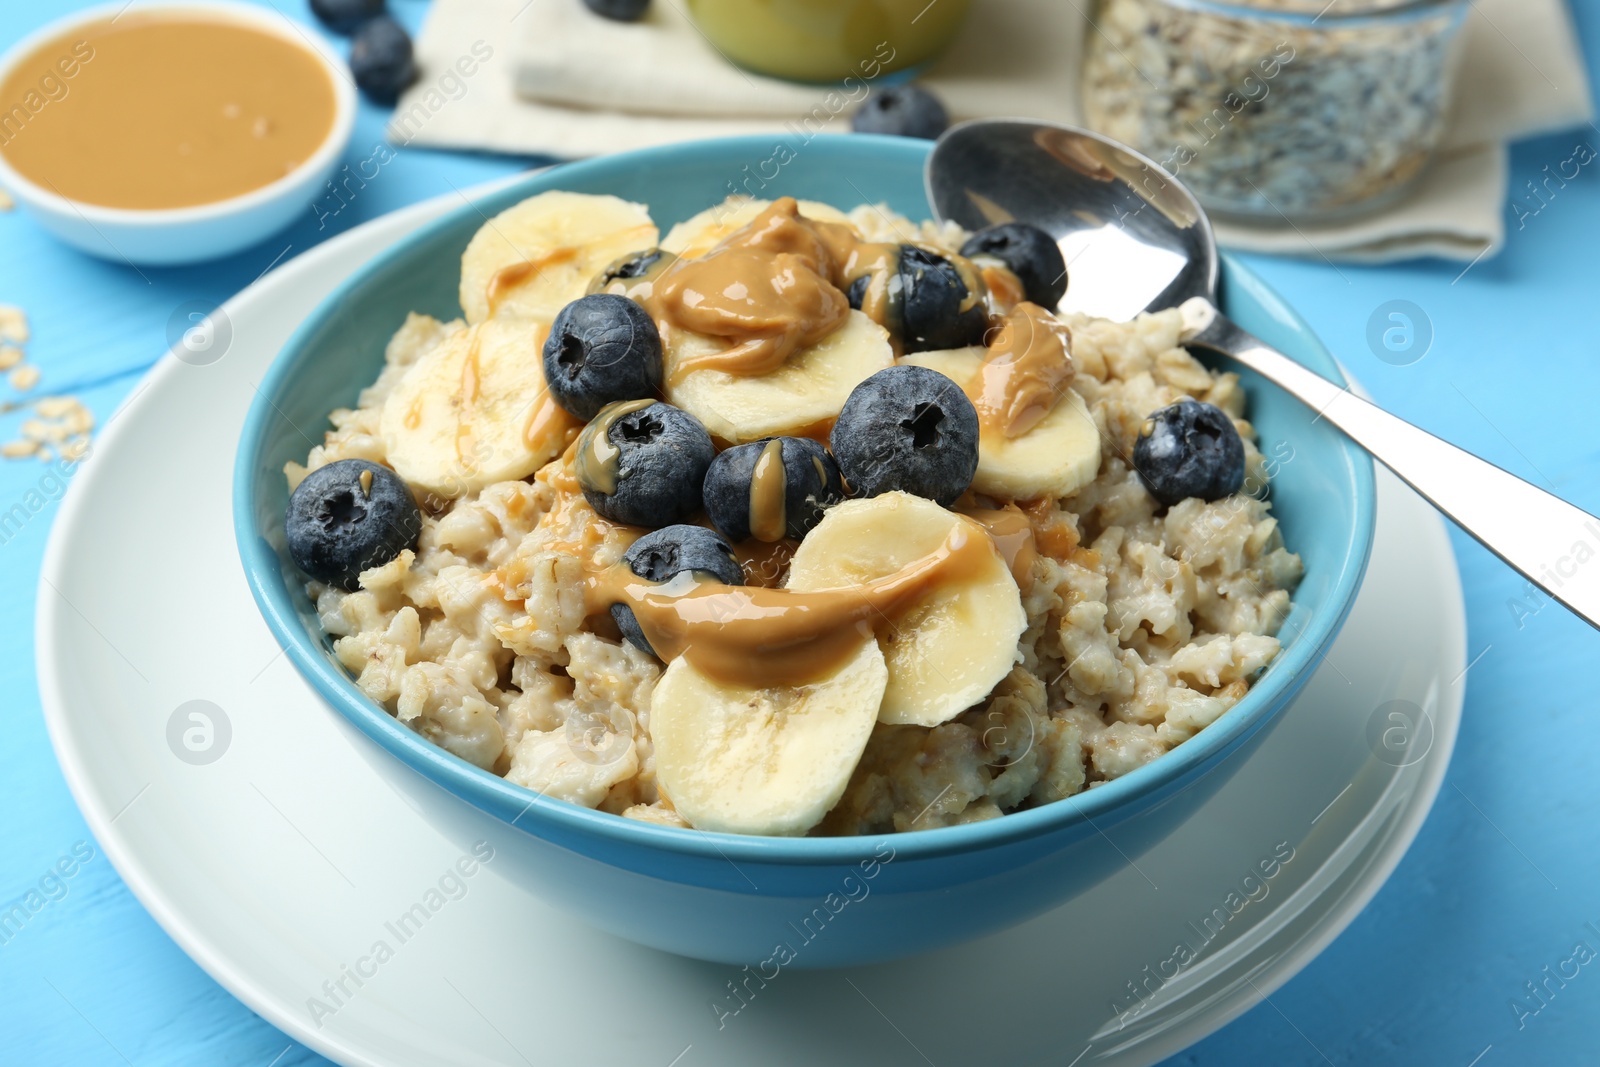 Photo of Tasty oatmeal with banana, blueberries and peanut butter served in bowl on light blue wooden table